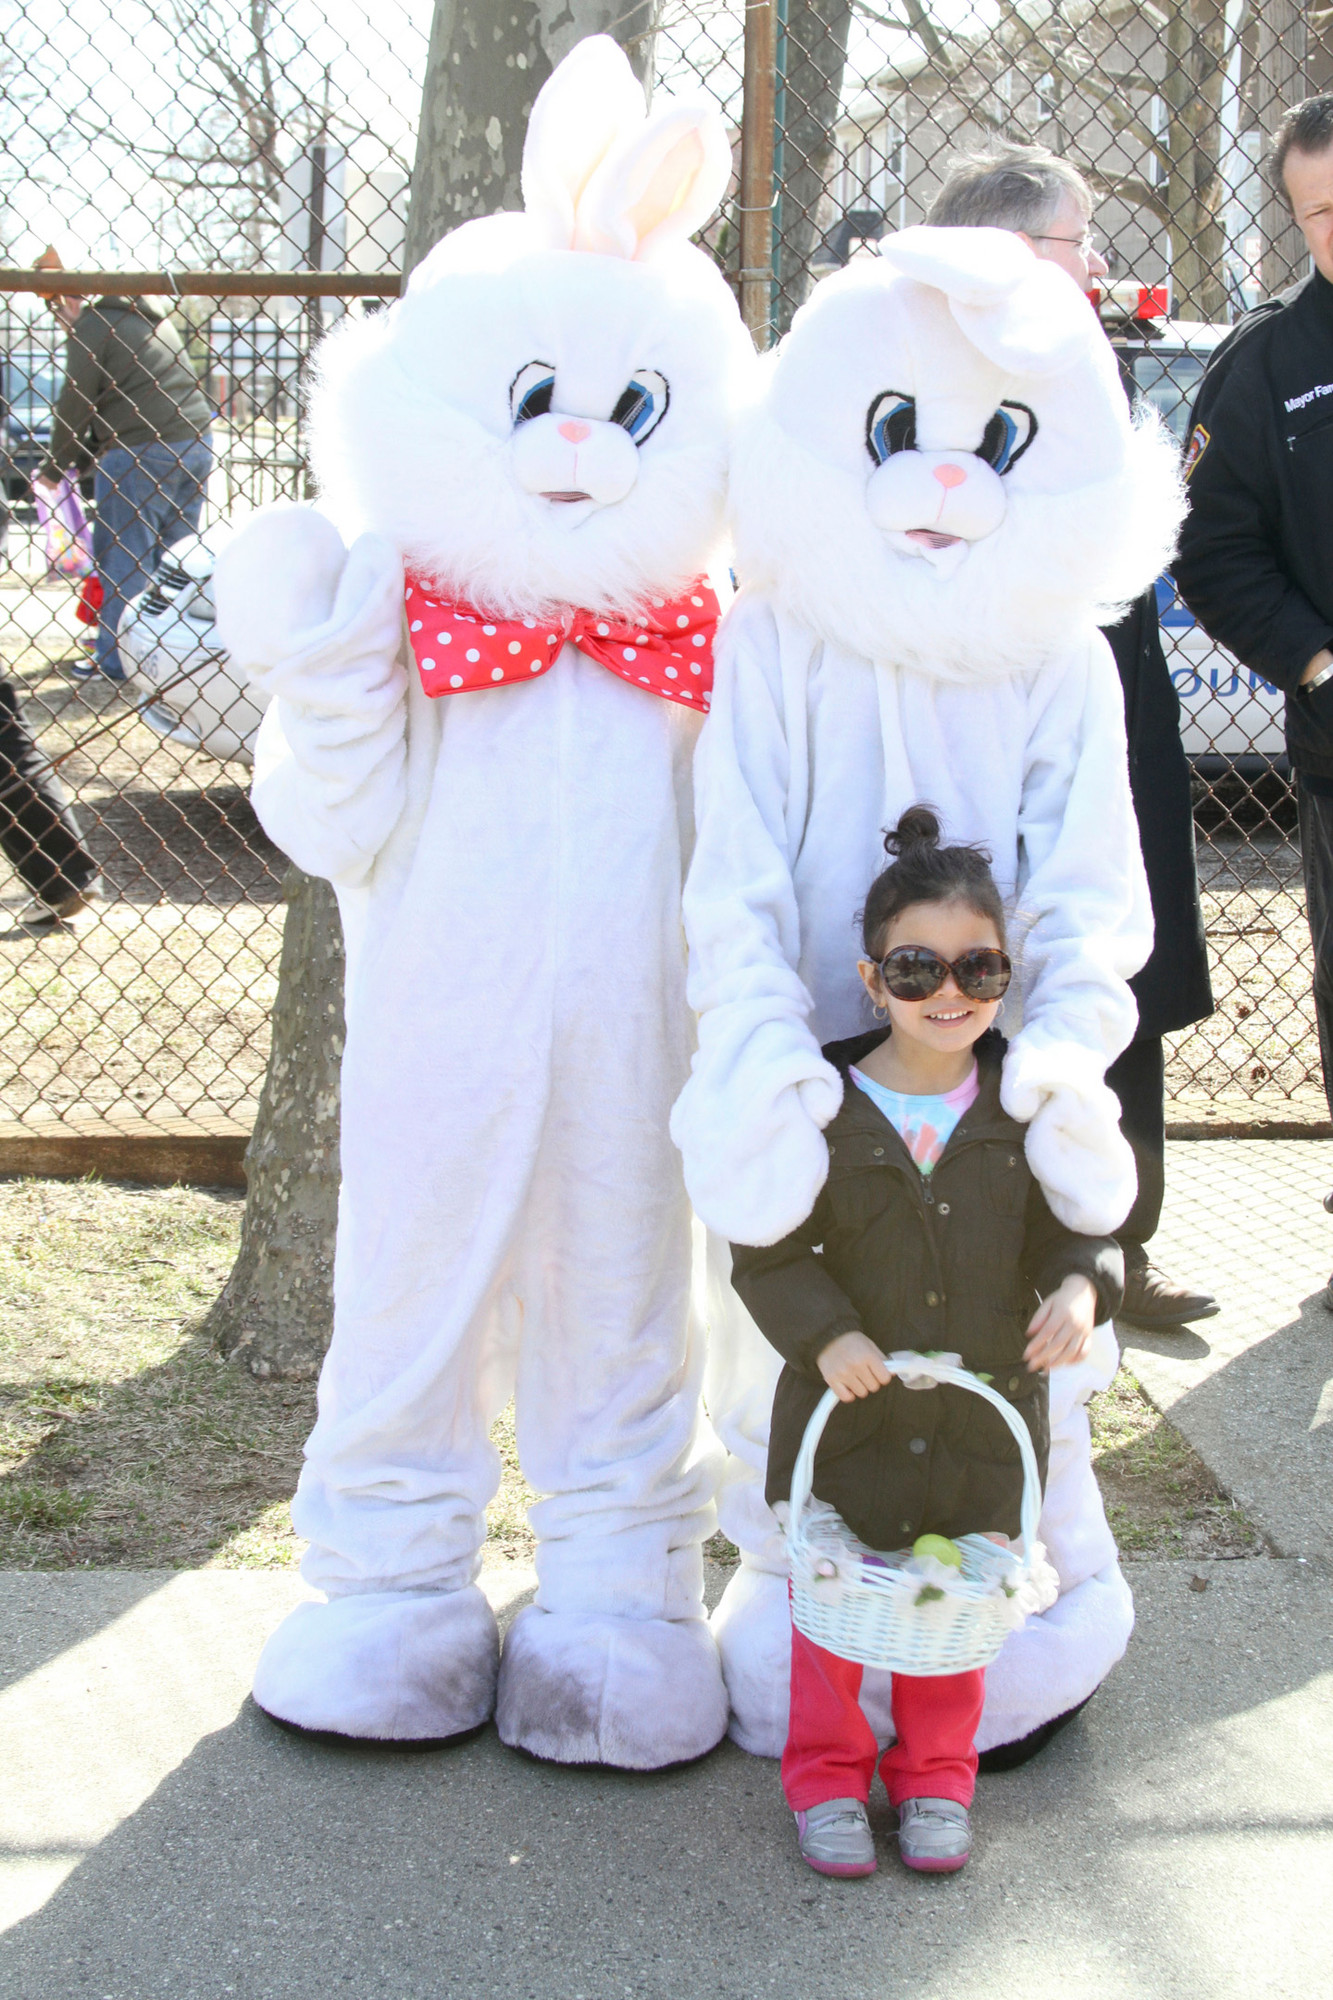 Liliana Ortiz, 4, with Mr. and Mrs. Easter Bunny played by volunteers from the Valley Stream Youth Council.